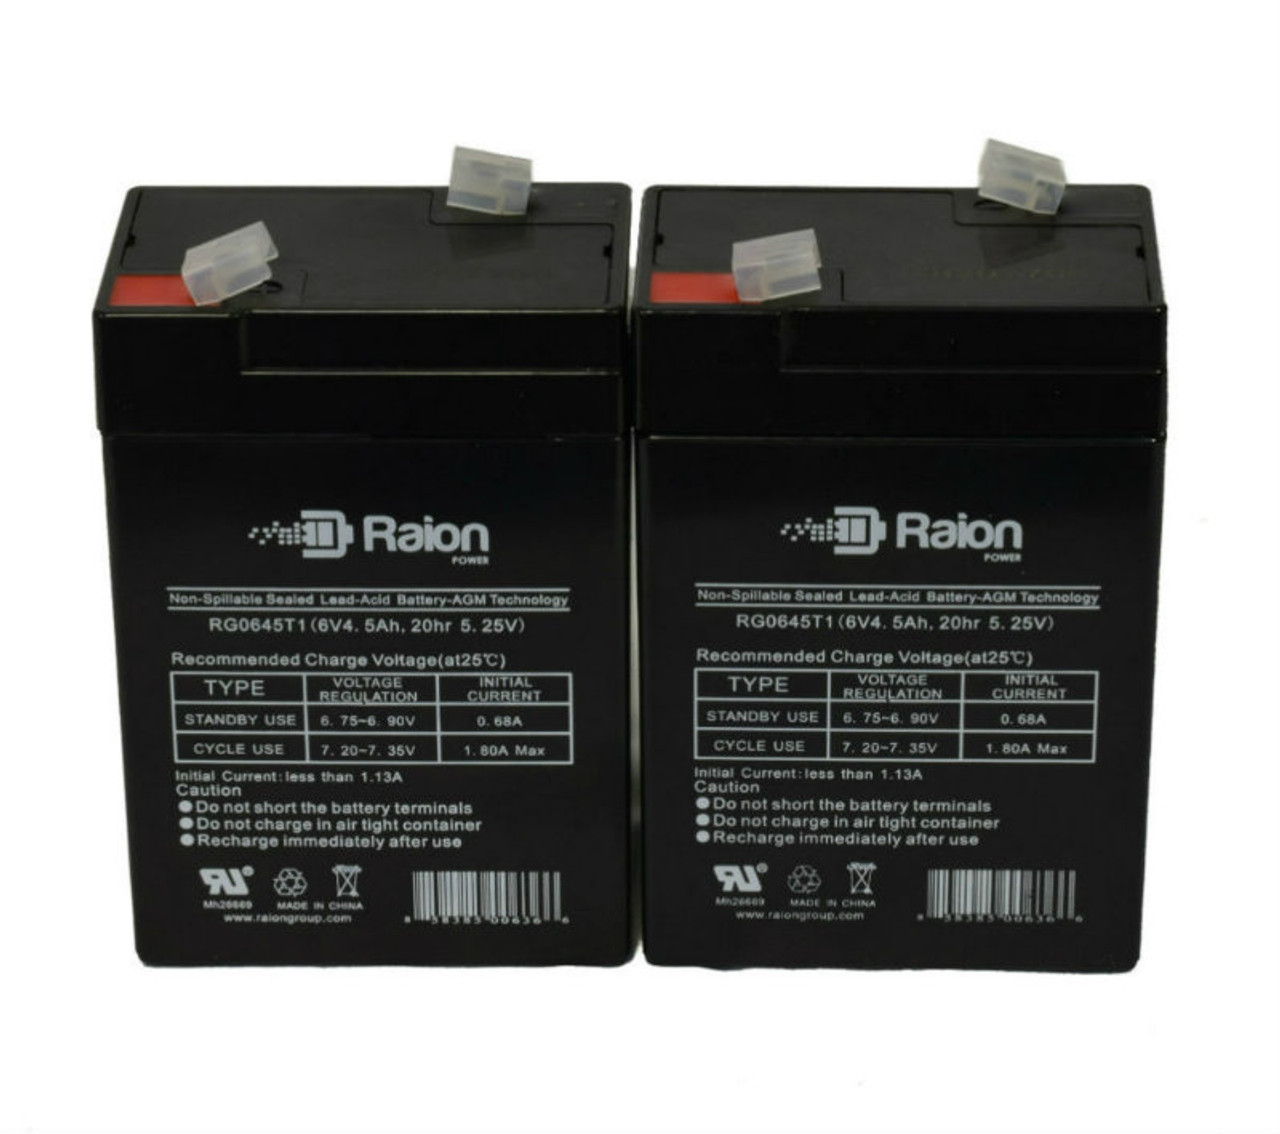 Raion Power 6 Volt 4.5Ah RG0645T1 Replacement Battery for Narada 3-FM-4 - 2 Pack